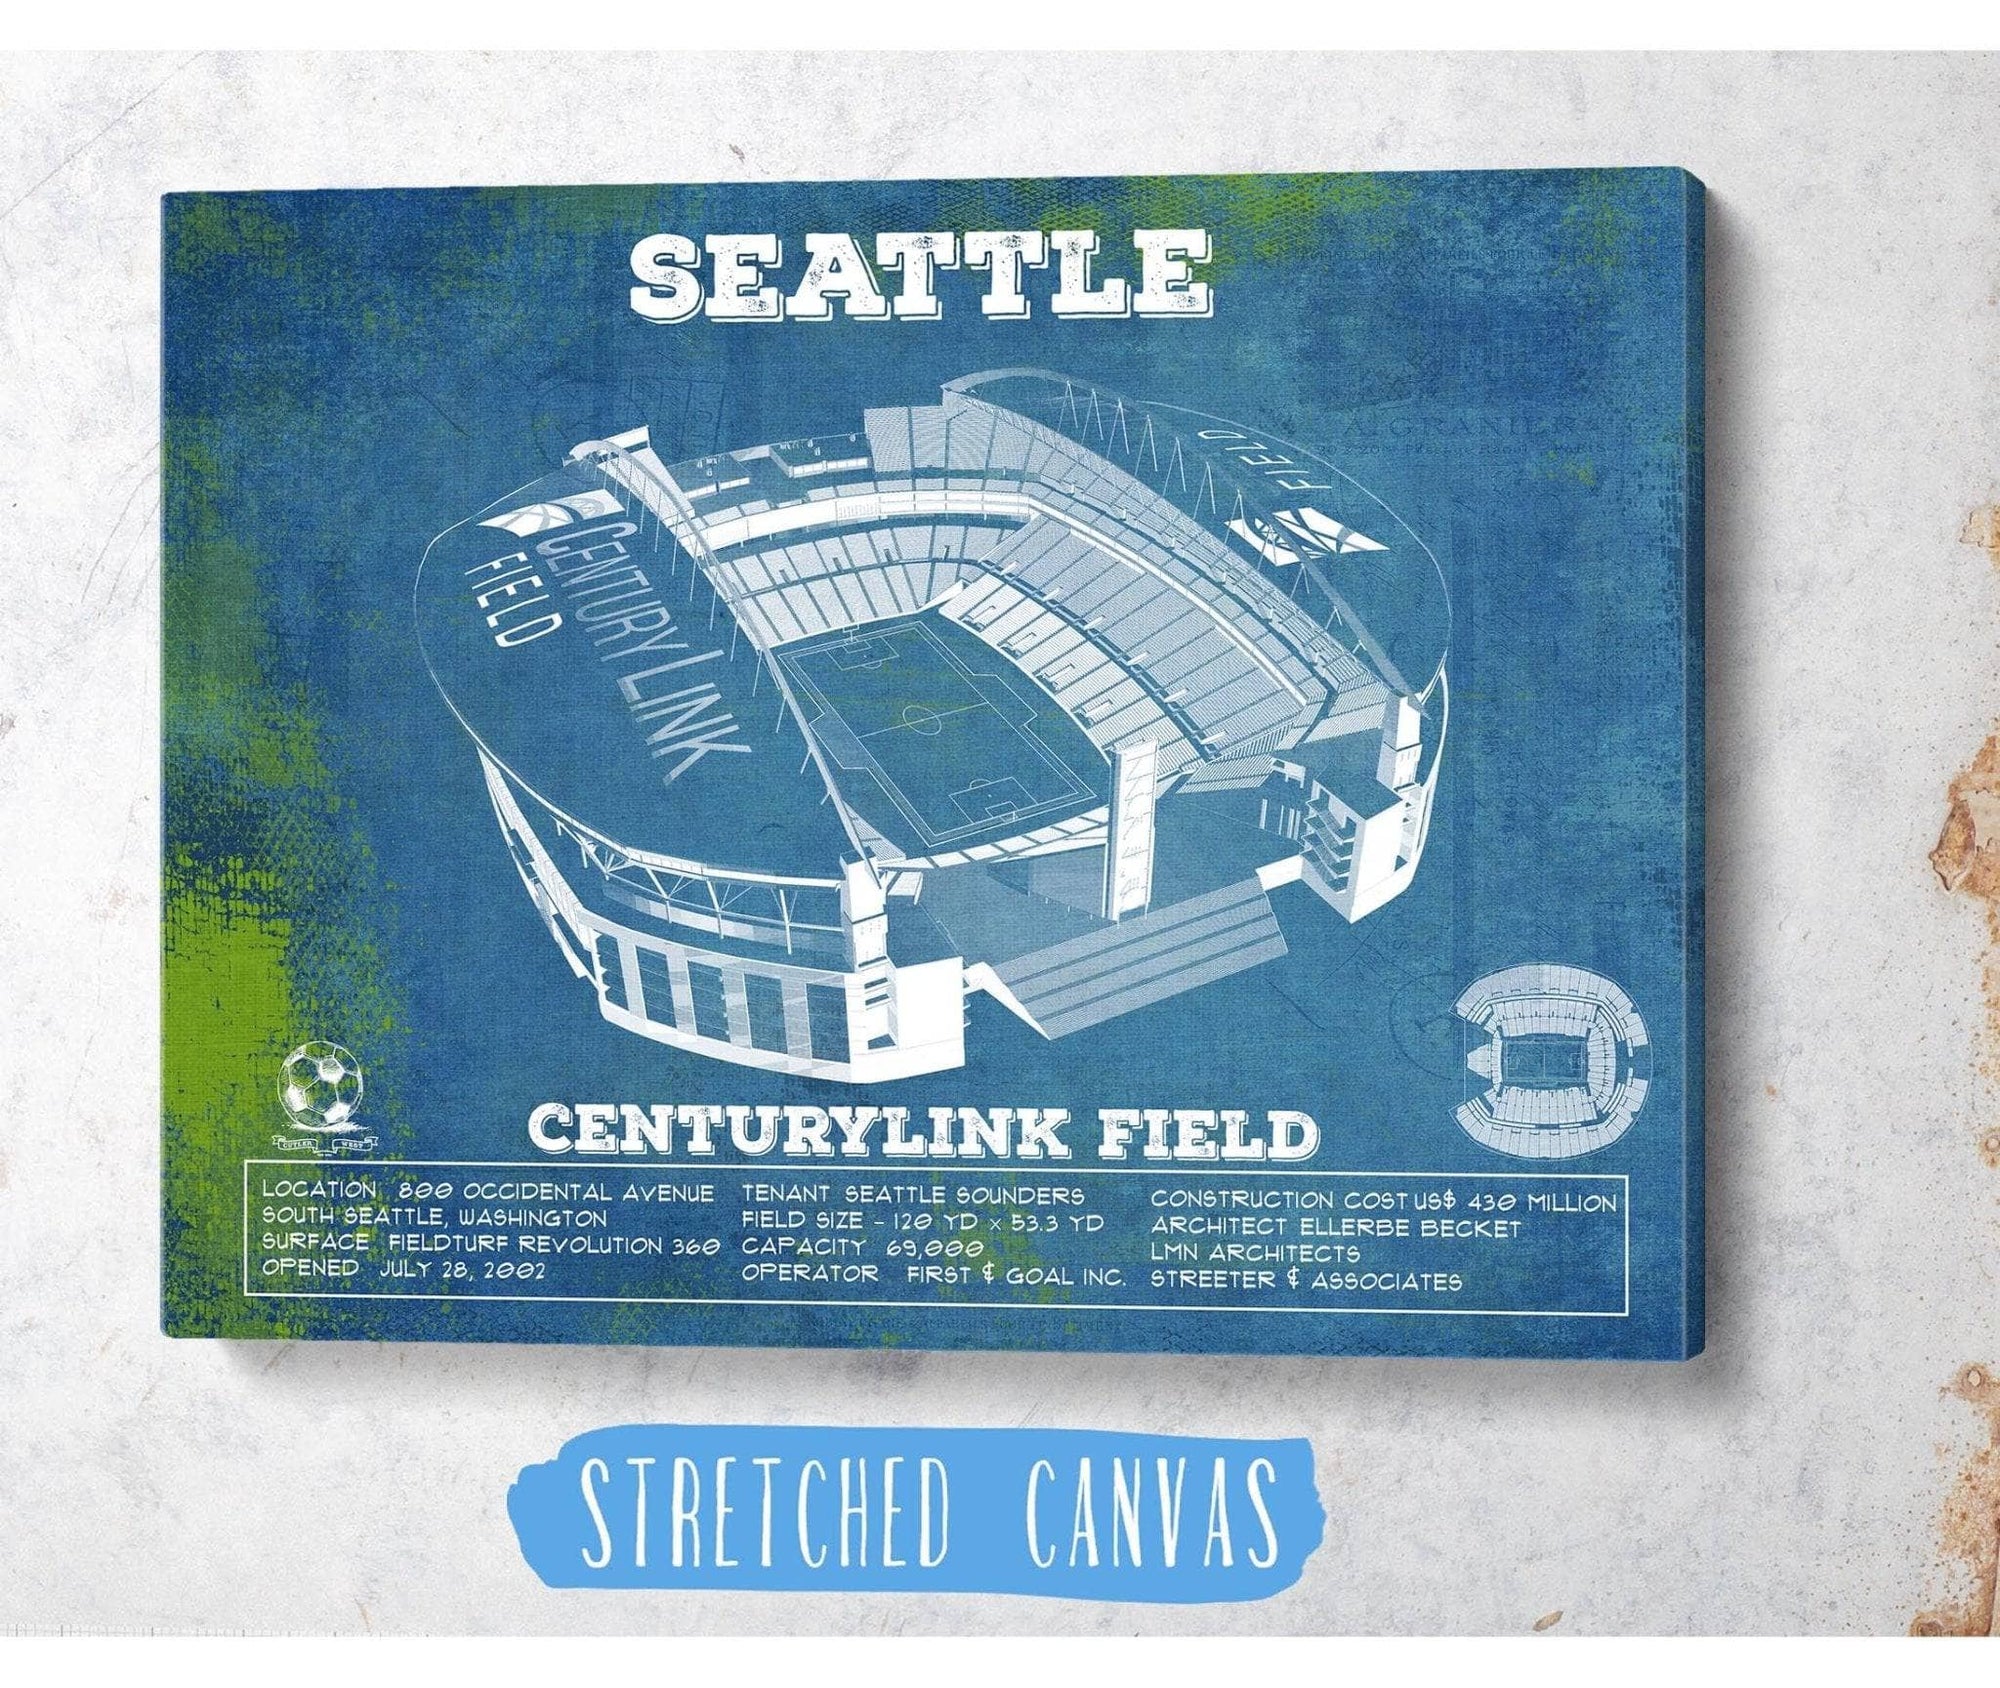 Cutler West Soccer Collection Seattle Sounders F.C. - Vintage Century Link Field MLS Soccer Print